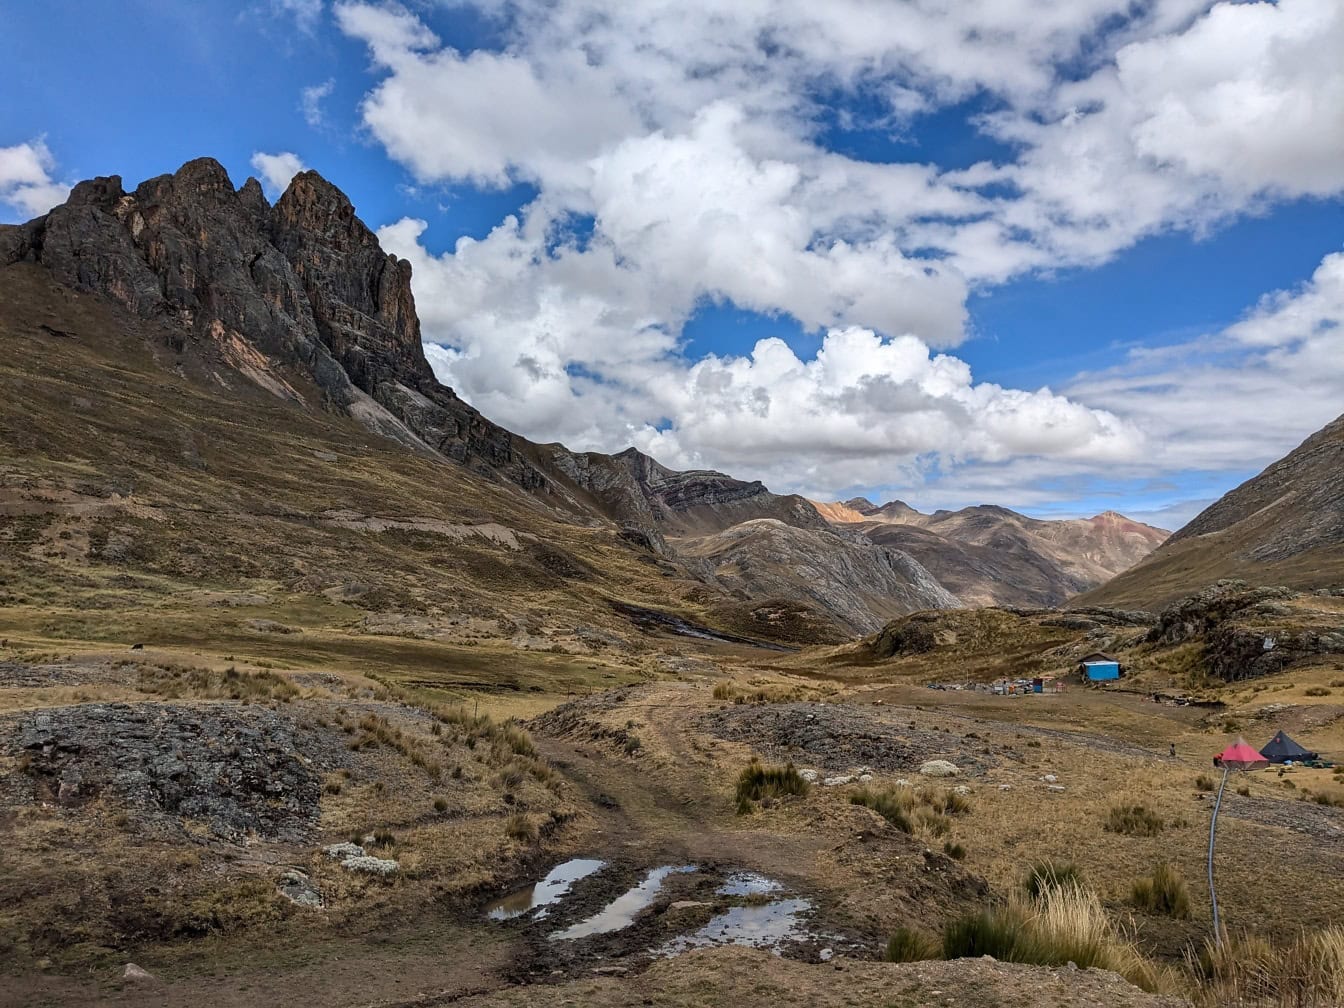 Mountain range with camping site in a valley at Cordillera Huayhuash mountain range in the Andes of Peru